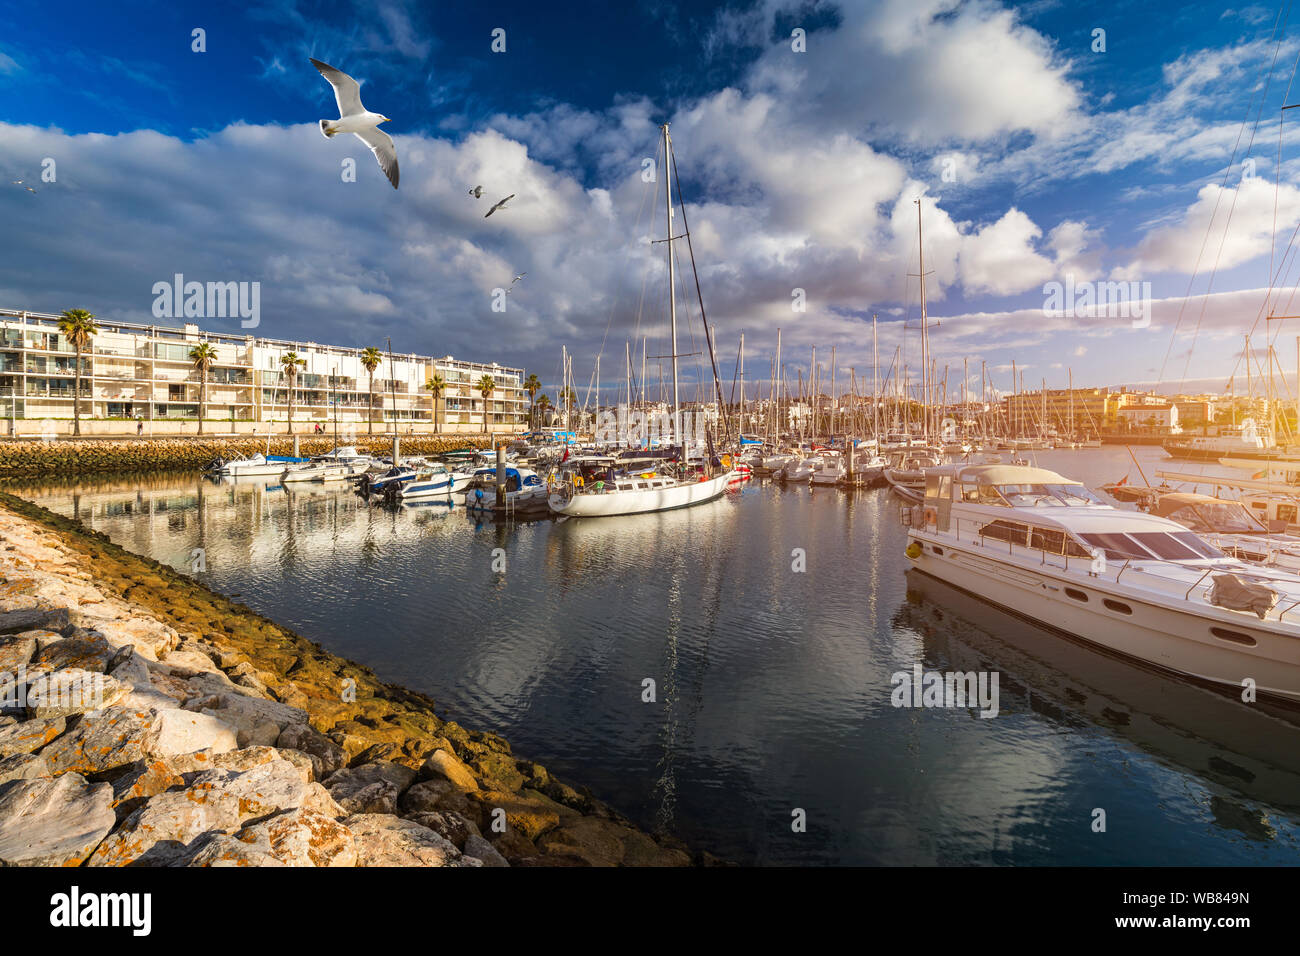 Moored fishing boats in the harbor at sunset with flying seagulls over the boats, Lagos, The Algarve, Portugal. Yachts moored in the marina, Lagos, Al Stock Photo